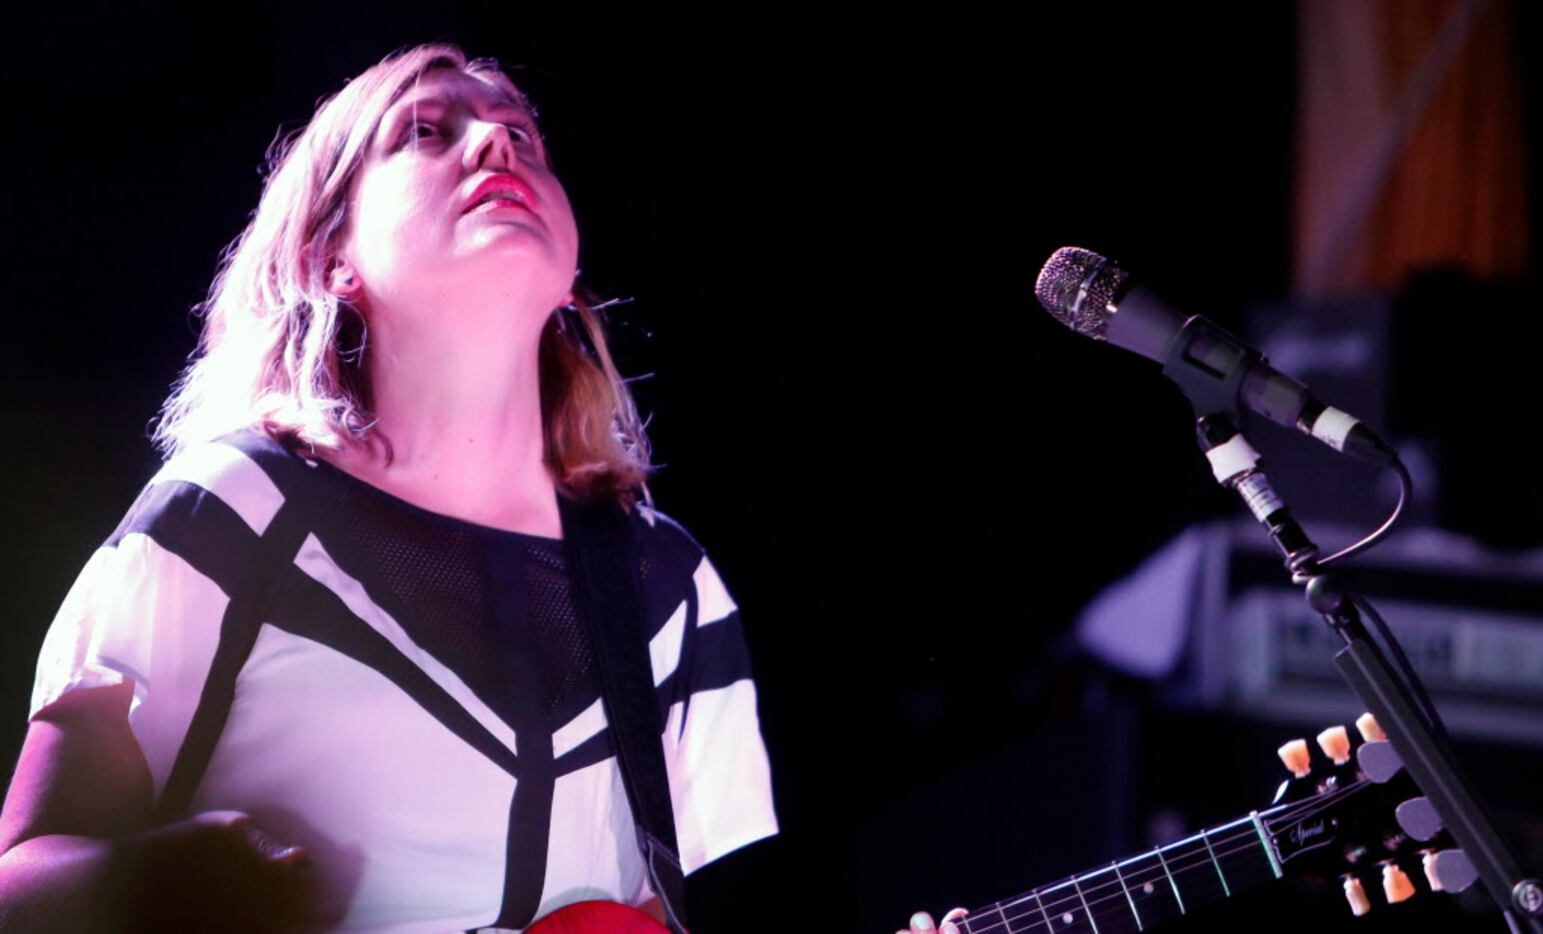 Corin Tucker and Sleater-Kinney performed at the Grenada Theatre on Thursday in Dallas.